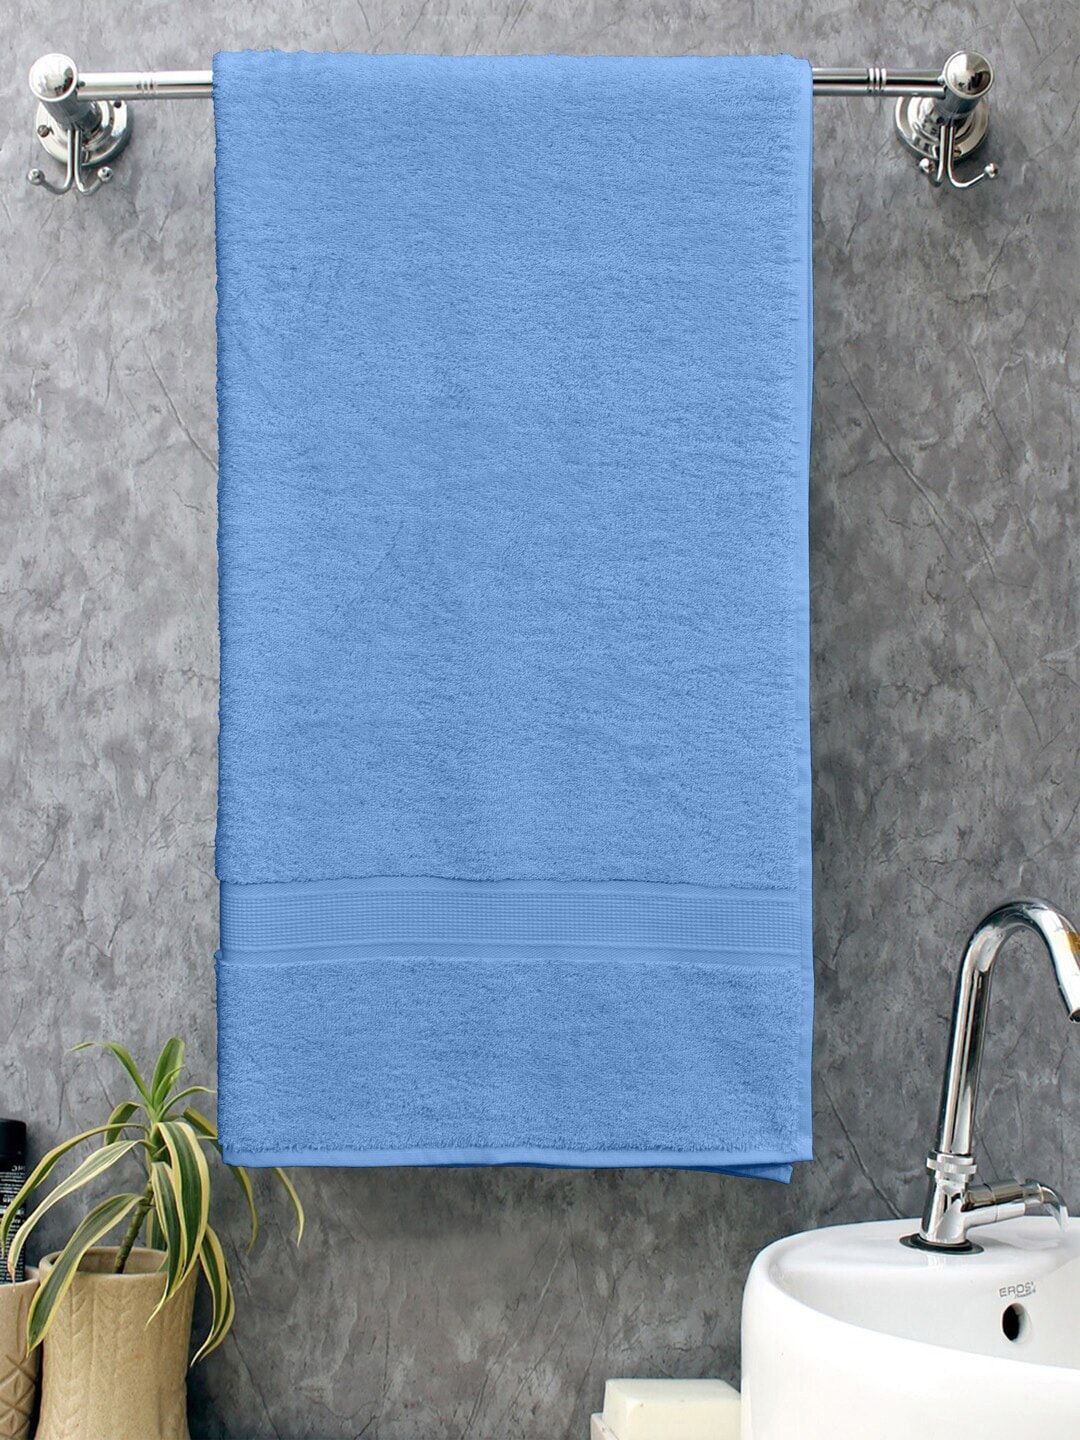 BOMBAY DYEING Blue Solid Cotton 450 GSM Cotton Tulip Bath Towel Price in India